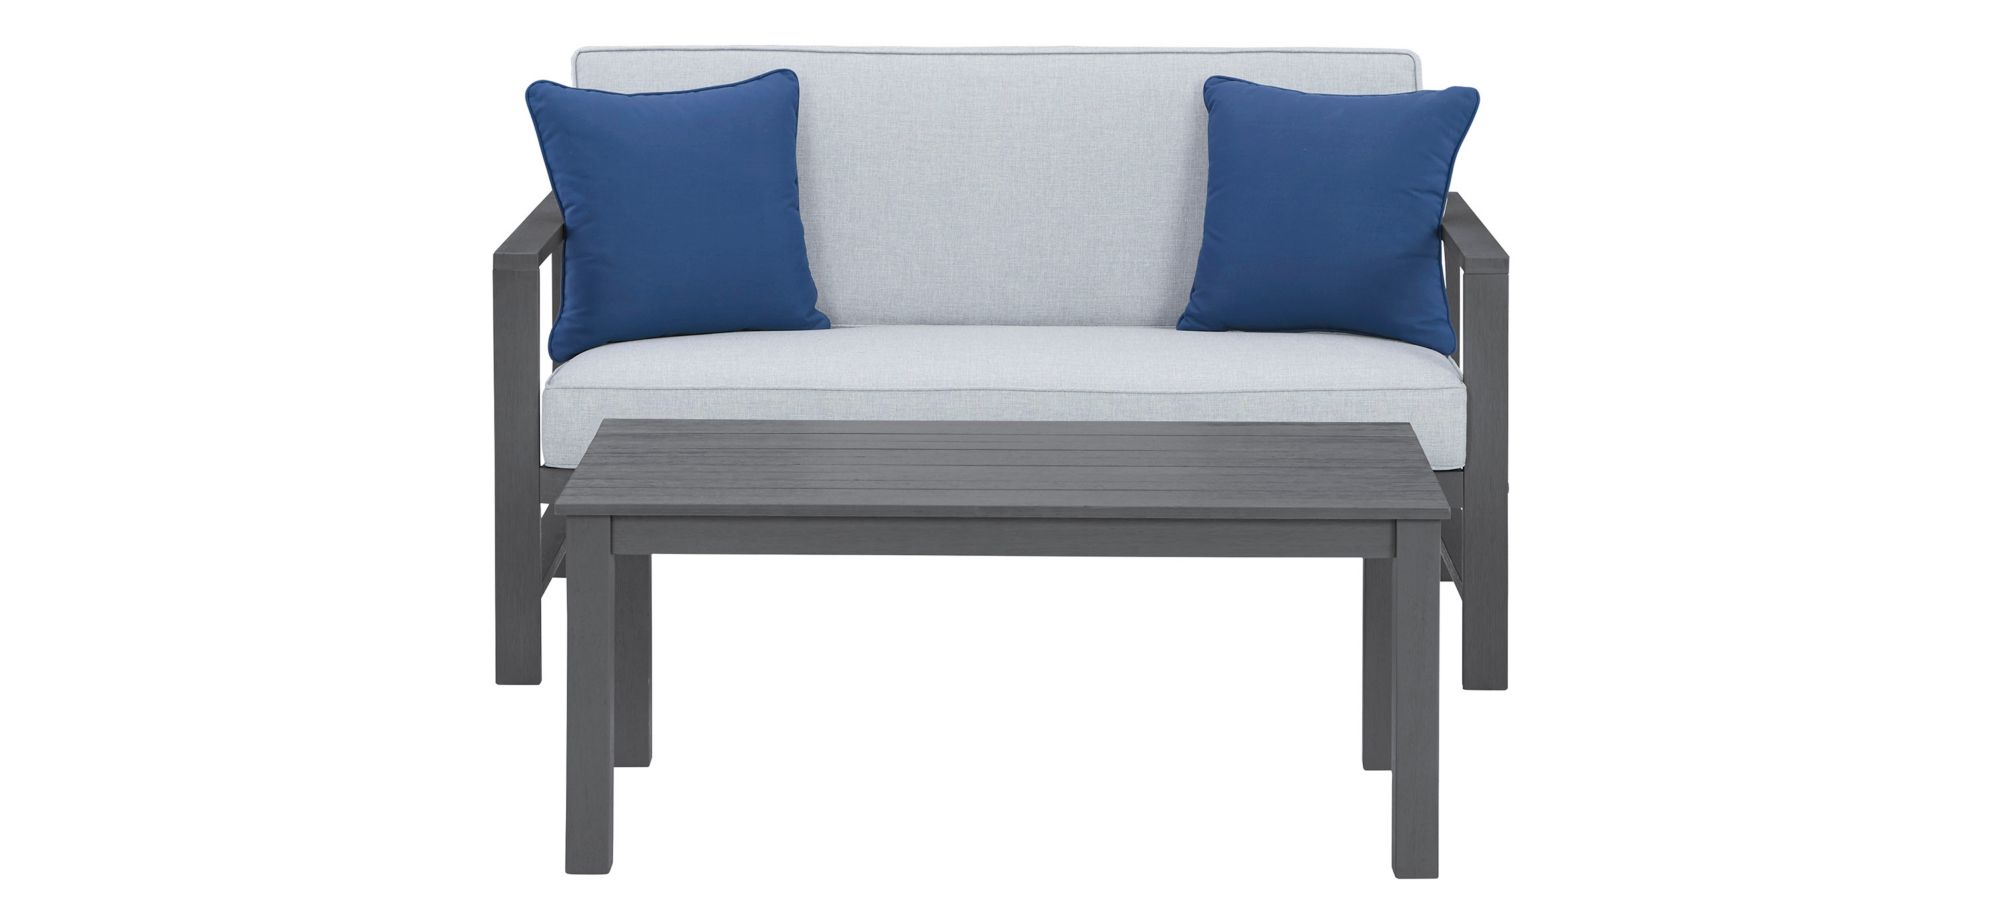 Fynnegan Outdoor Loveseat with Table in Stone by Ashley Furniture